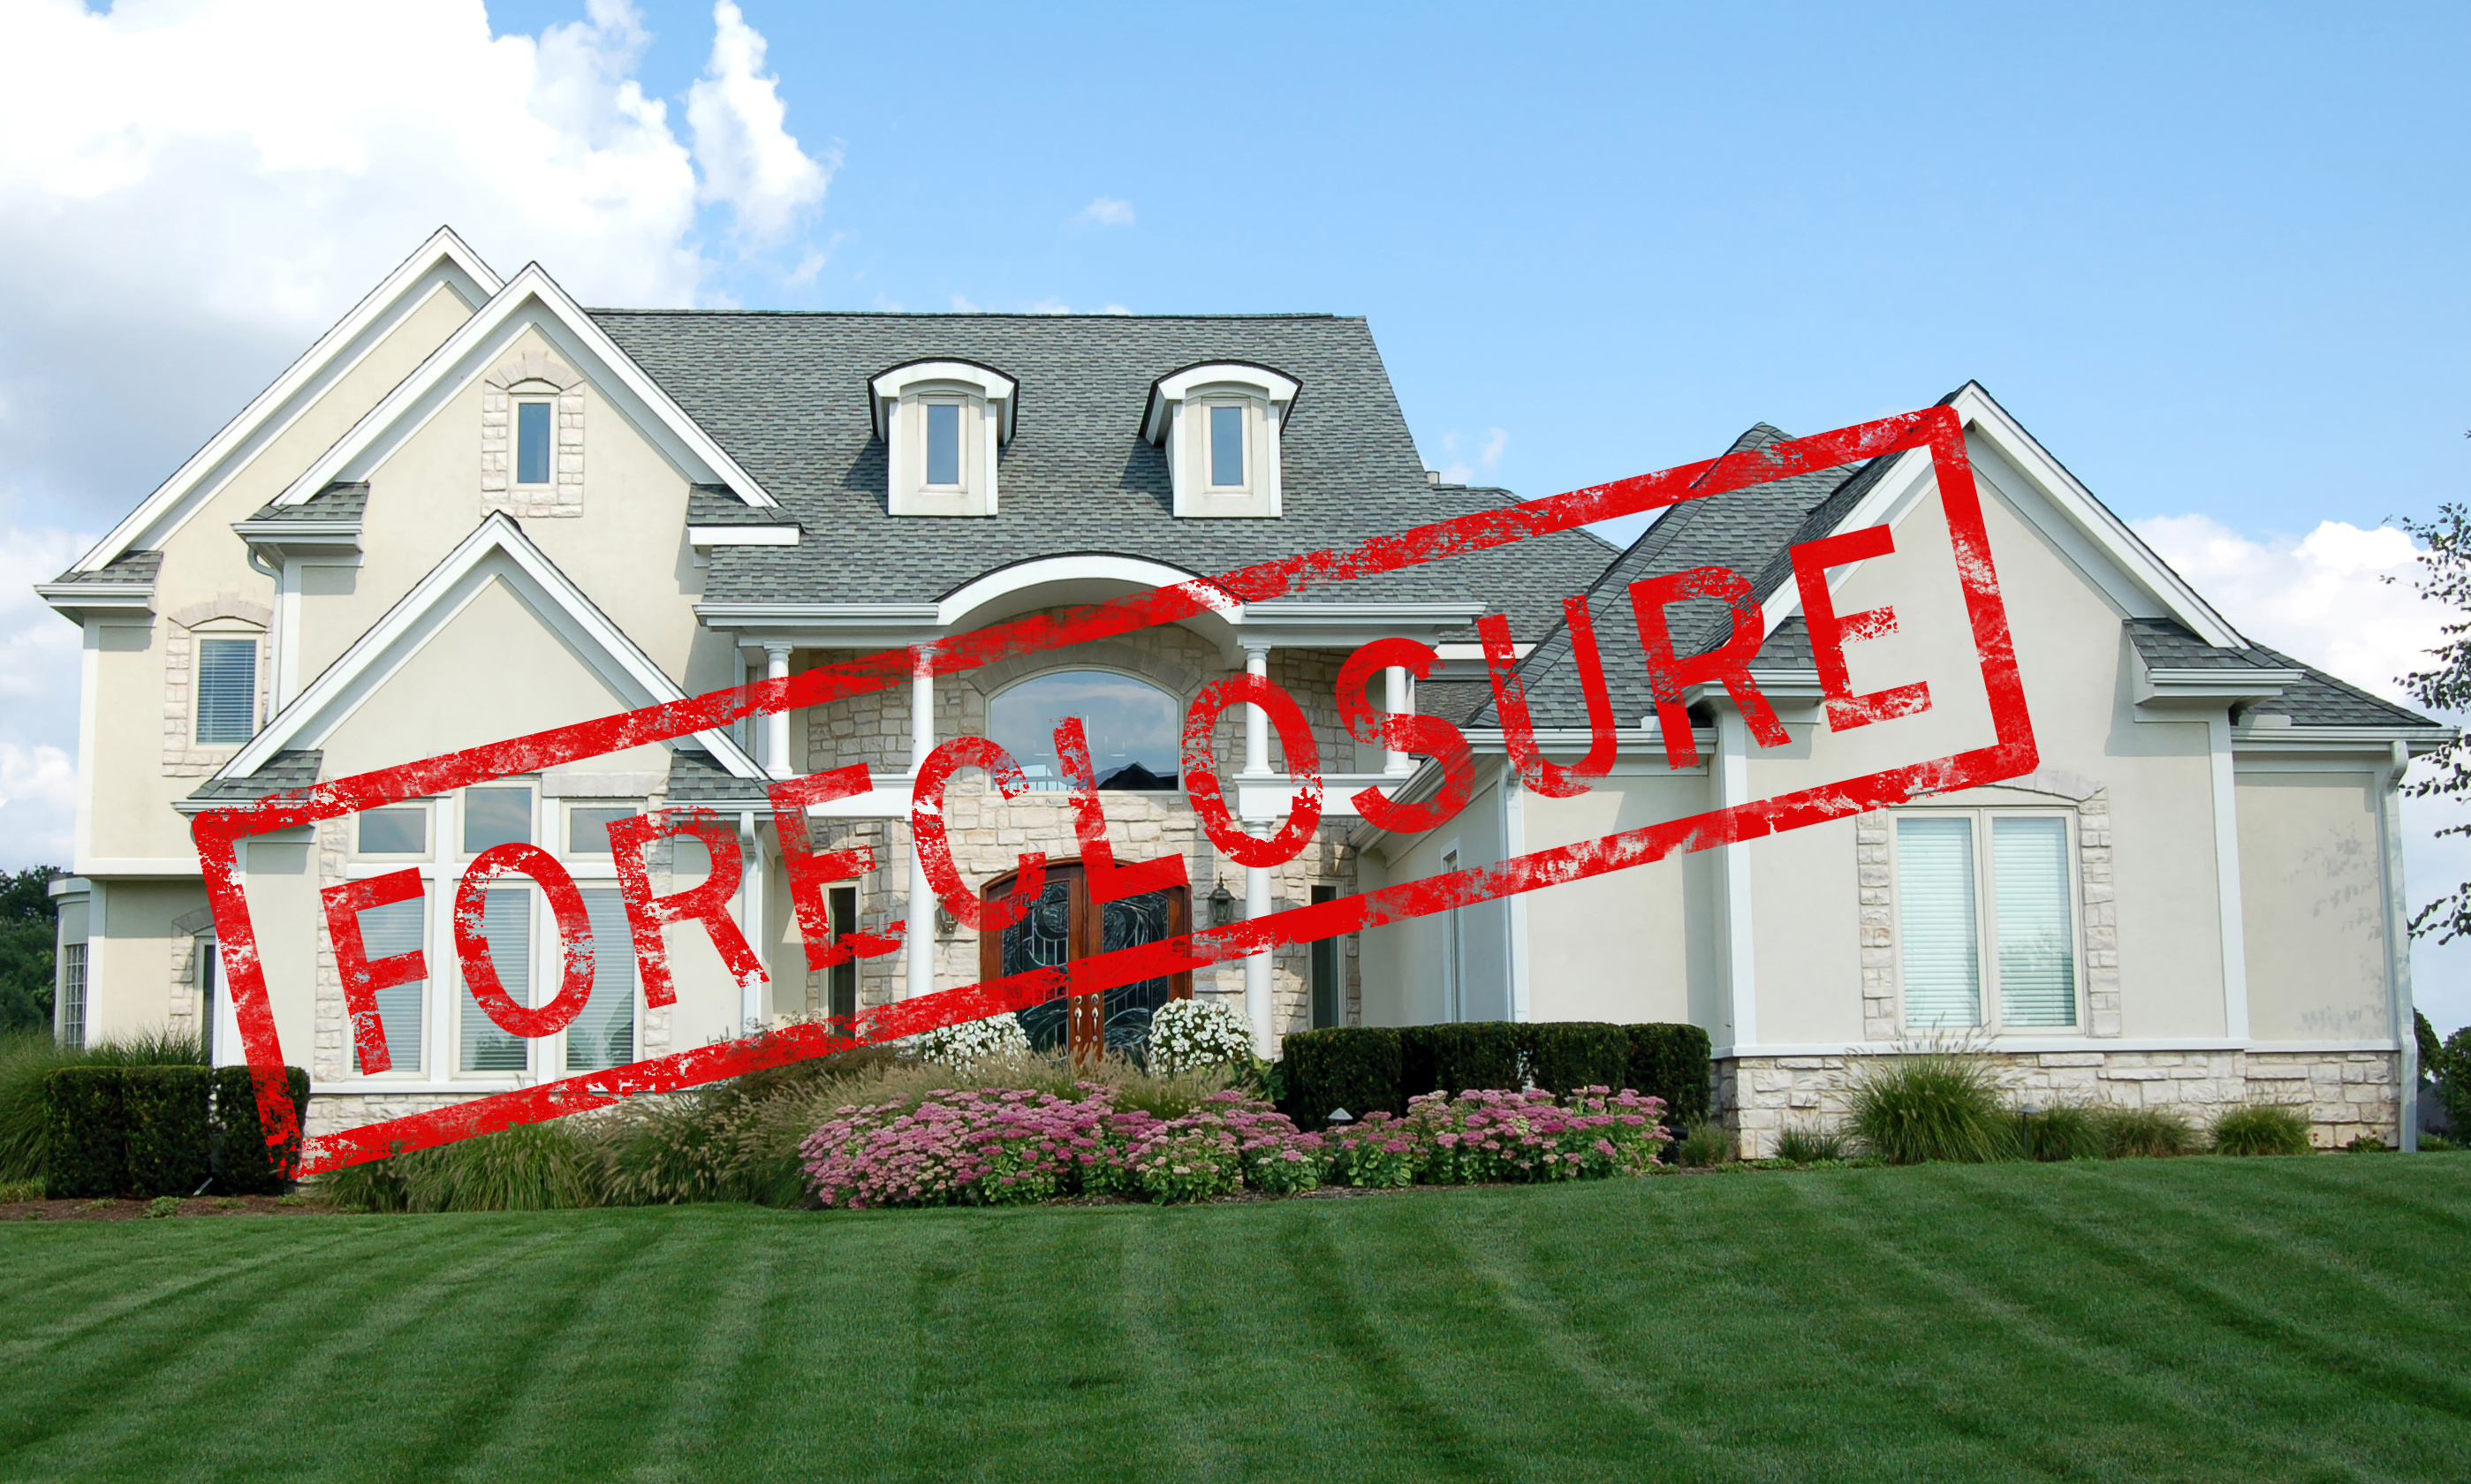 Call www.24hourappraisalgroup.com to order valuations pertaining to Saint Charles foreclosures